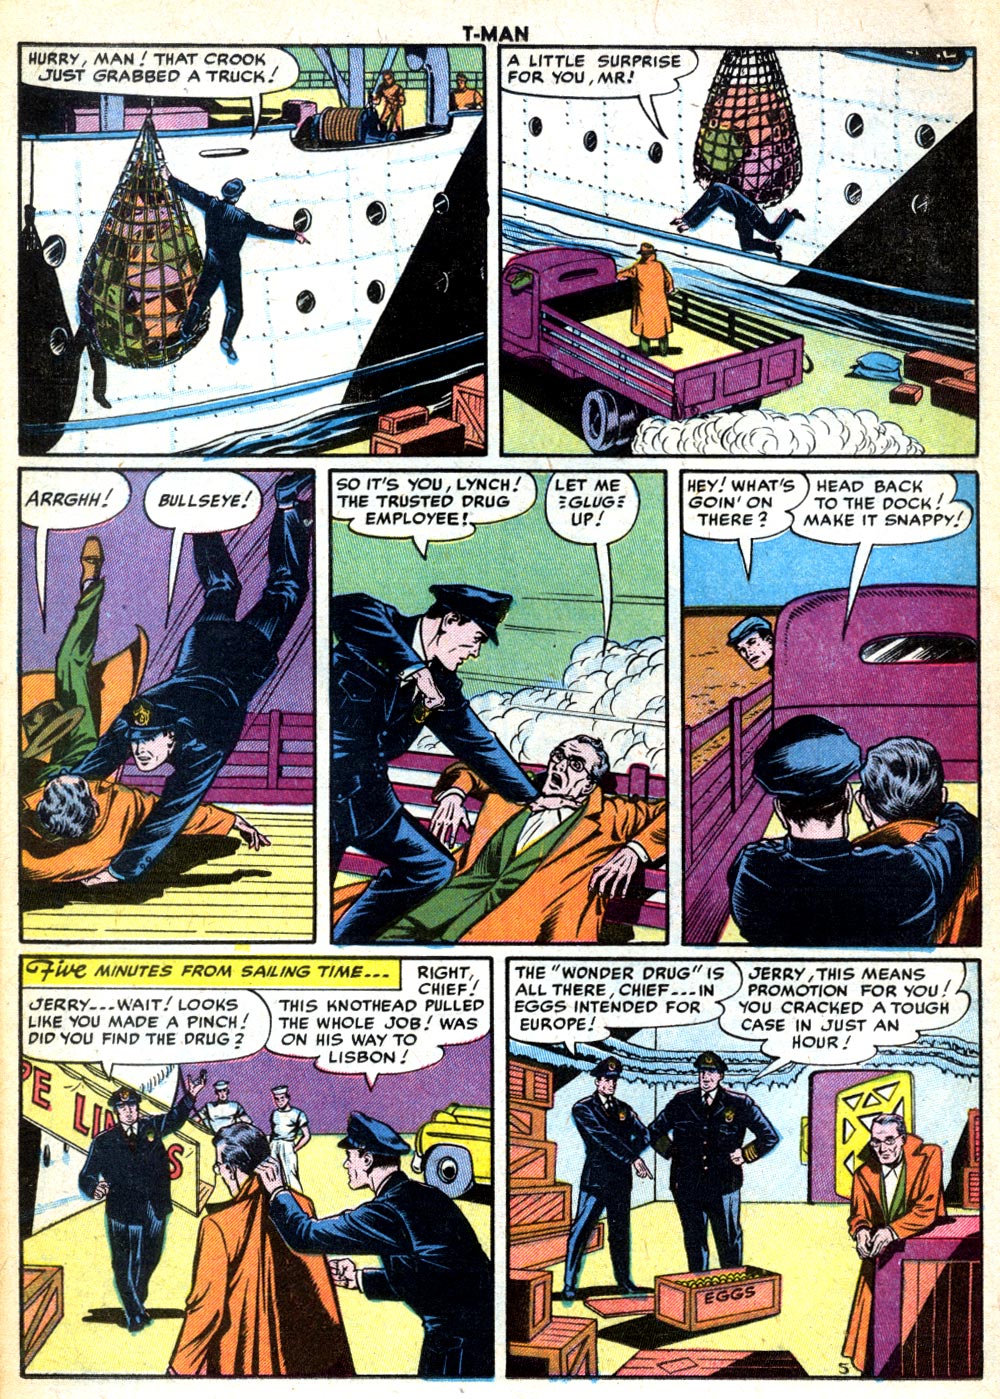 Read online T-Man: World Wide Trouble Shooter comic -  Issue #35 - 18